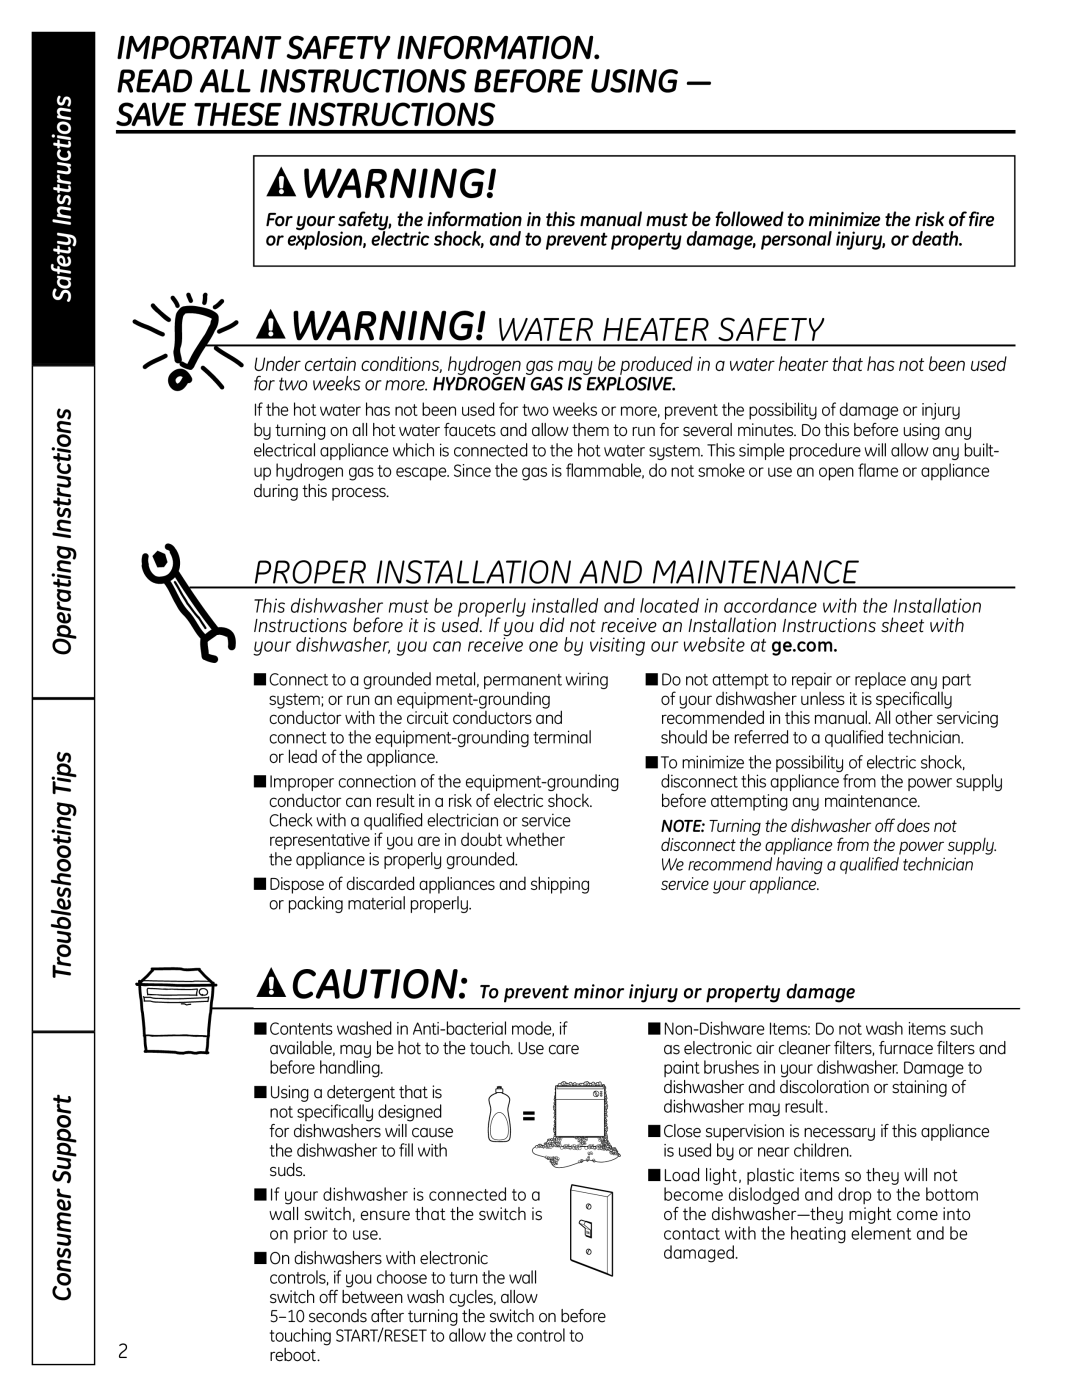 GE GLDA690 Important Safety Information, Read All Instructions Before Using, Save These Instructions, Safety Instructions 